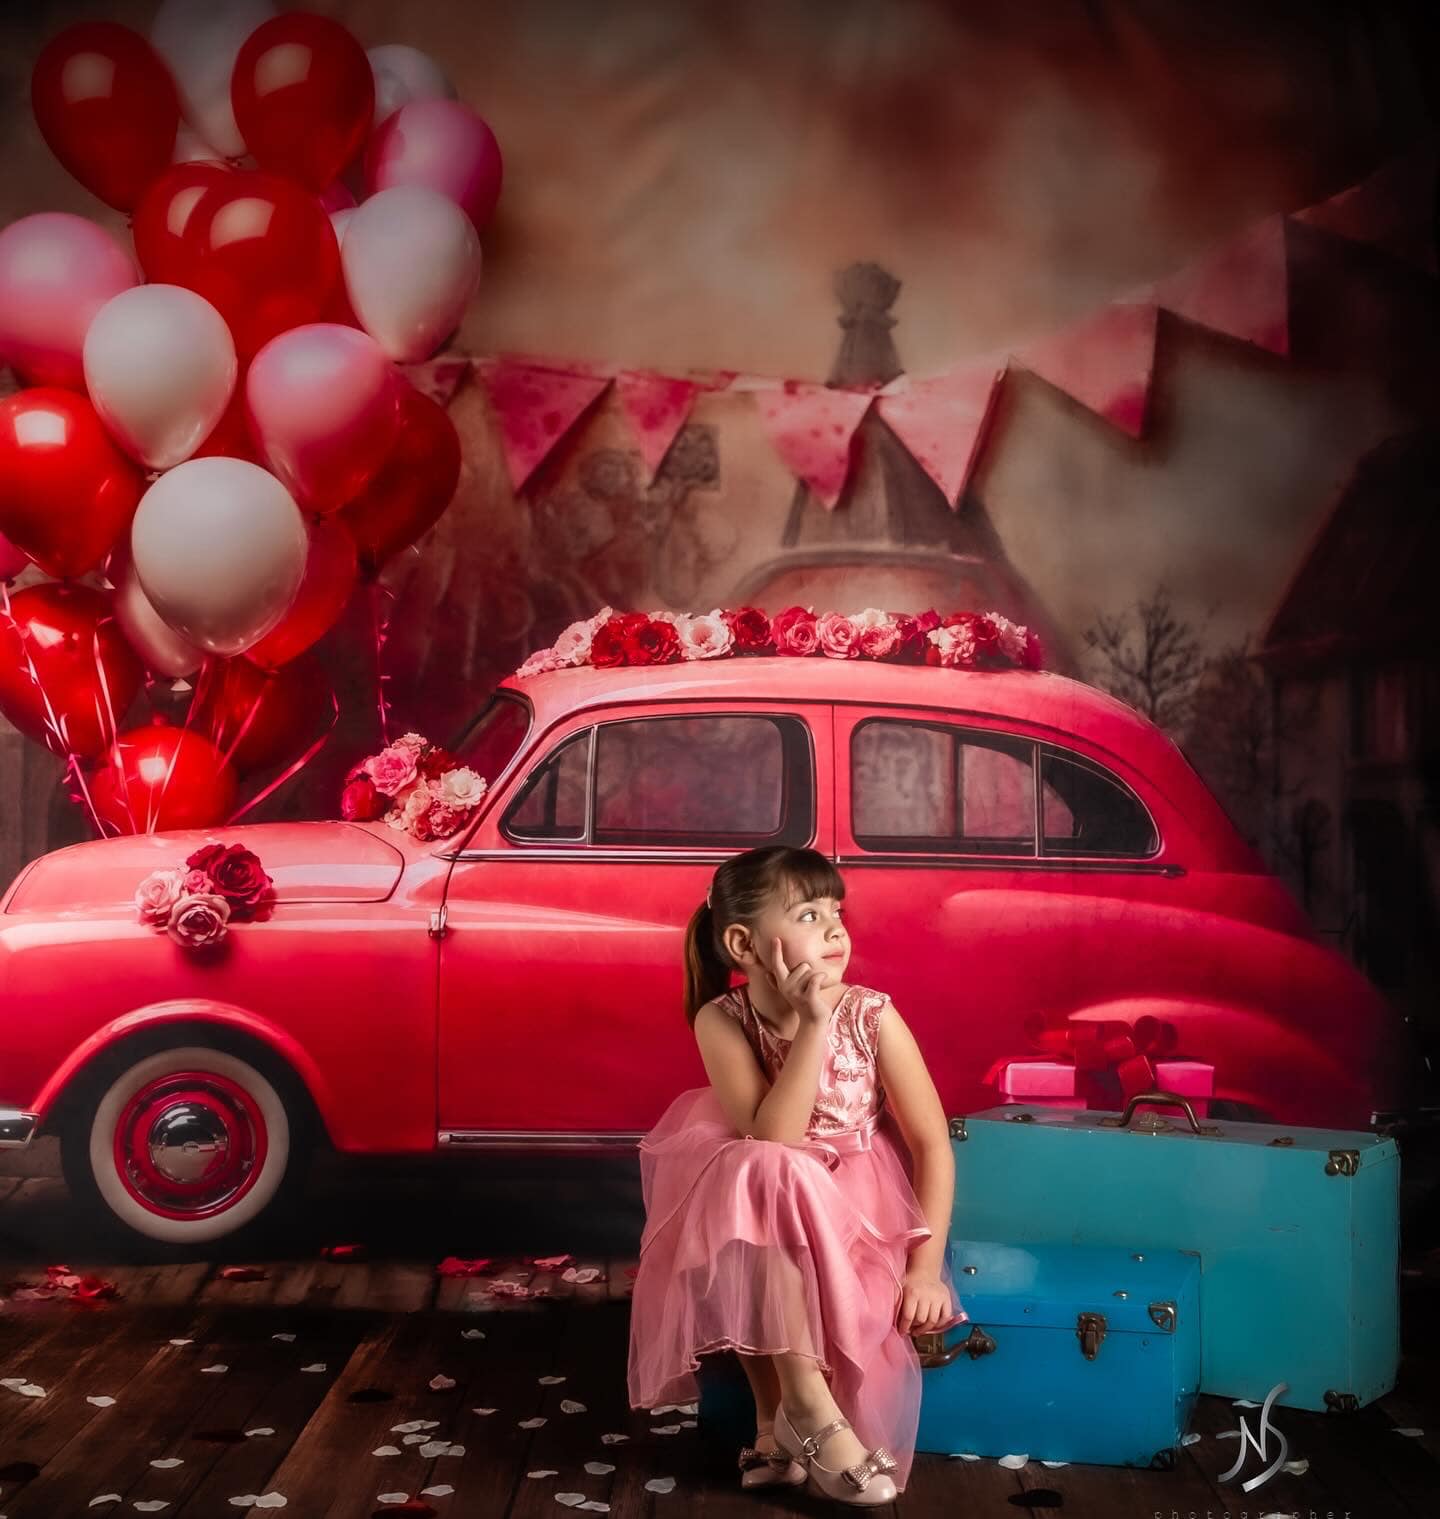 Kate Valentine's Day Pink Car Balloon Backdrop Designed by Emetselch